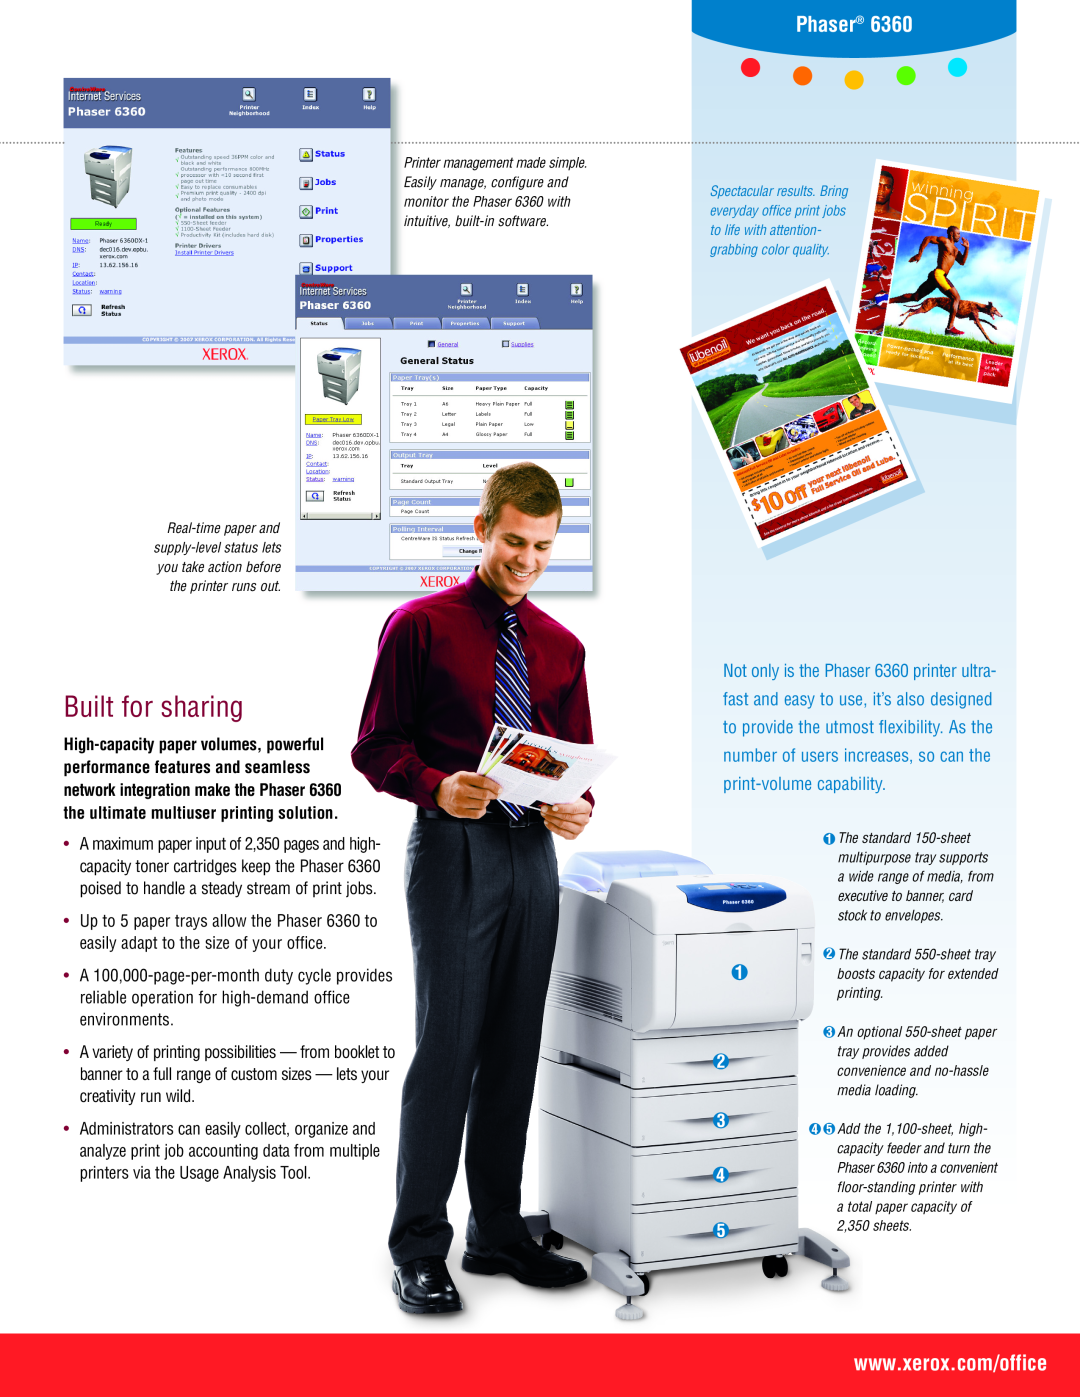 Xerox manual Built for sharing, Not only is the Phaser 6360 printer ultra, print-volume capability 